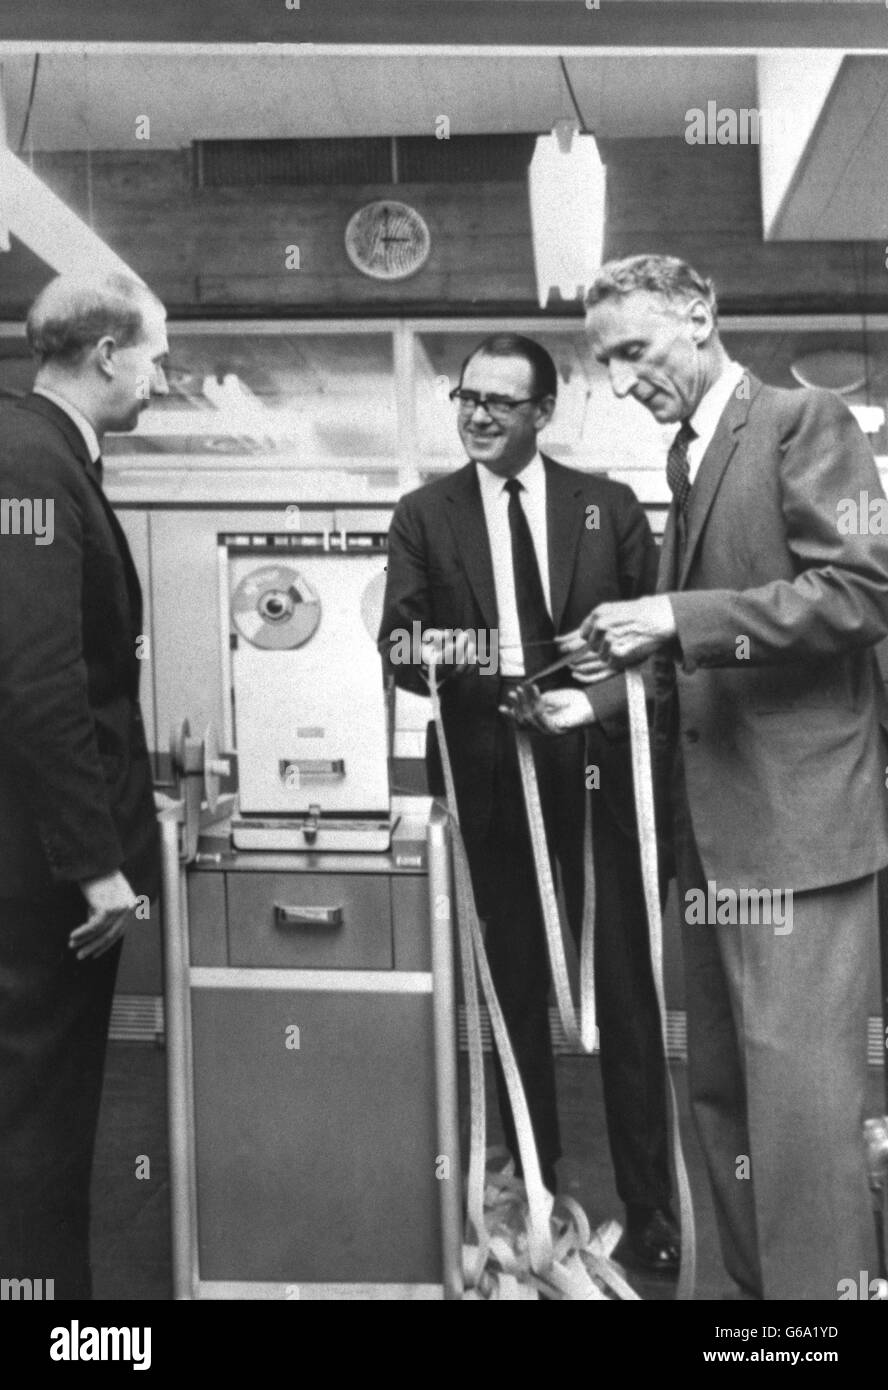 Examining the output of a computer which can give quick answers are (from l-r) Sir Roger Stevens, Vice-Chancellor of Leeds University, Professor Brian Flowers, of Manchester University and Chairman of the Computer Board of Universities, and Professor G.B. Cook, Director of Leeds University. Professor Flowers is examining the output of a paper punch, part of the K.D.F. 9 Computer at Leeds University, which is able to do more work after a recent upgrade with new equipment. Stock Photo